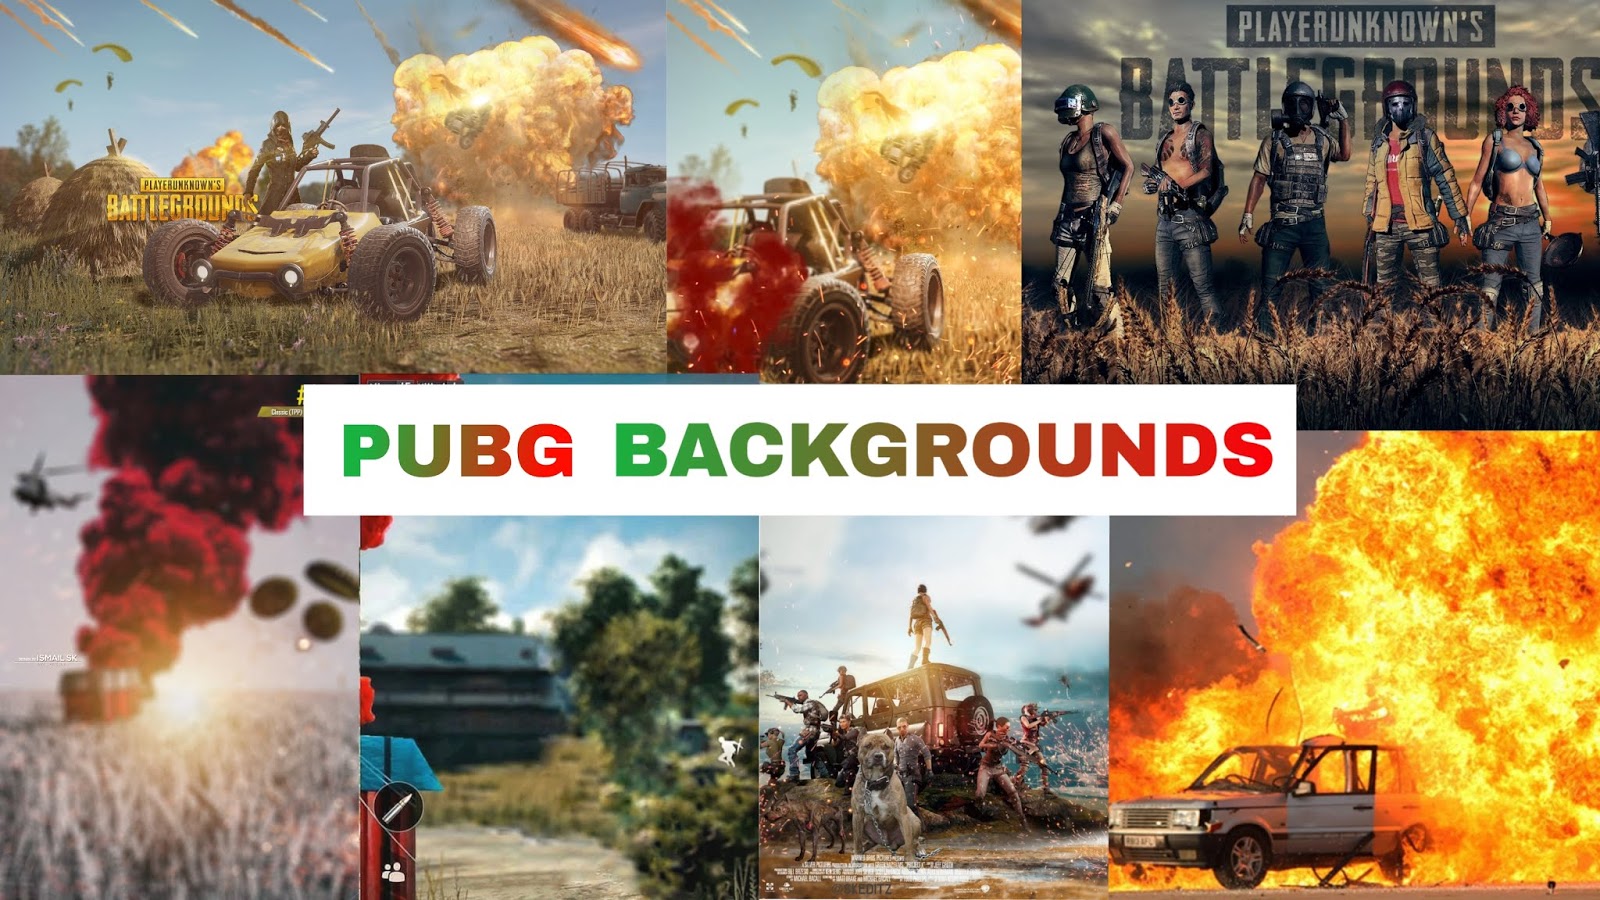 Pubg Background Png Download For Photo Editing Hd